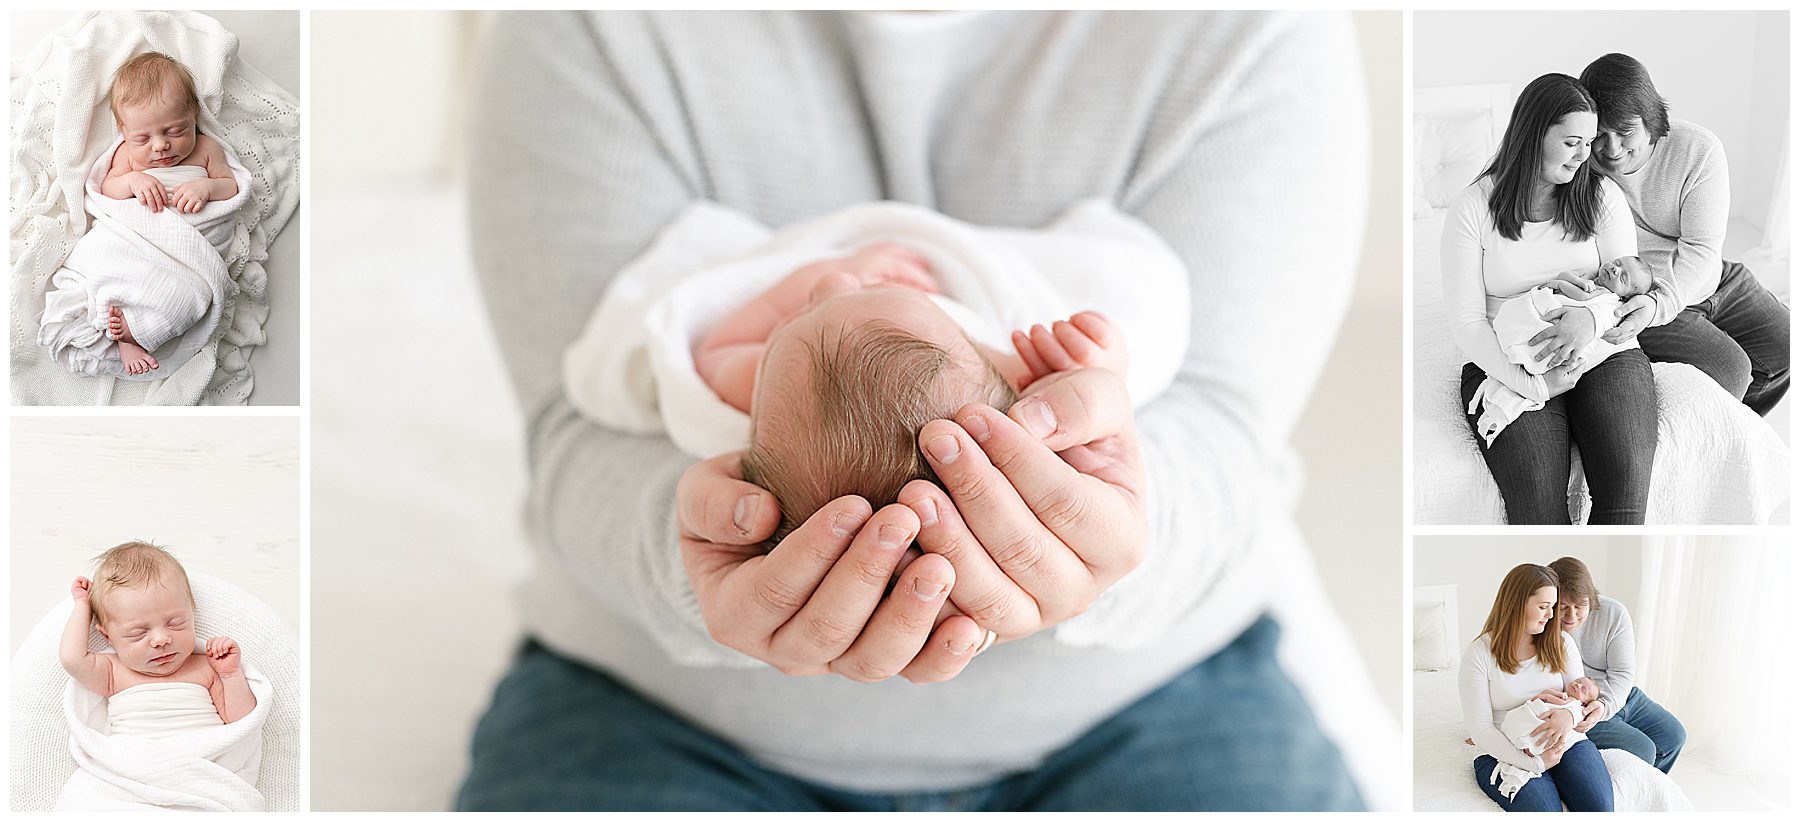 tiny 6 pound newborn baby girl in her parents hands